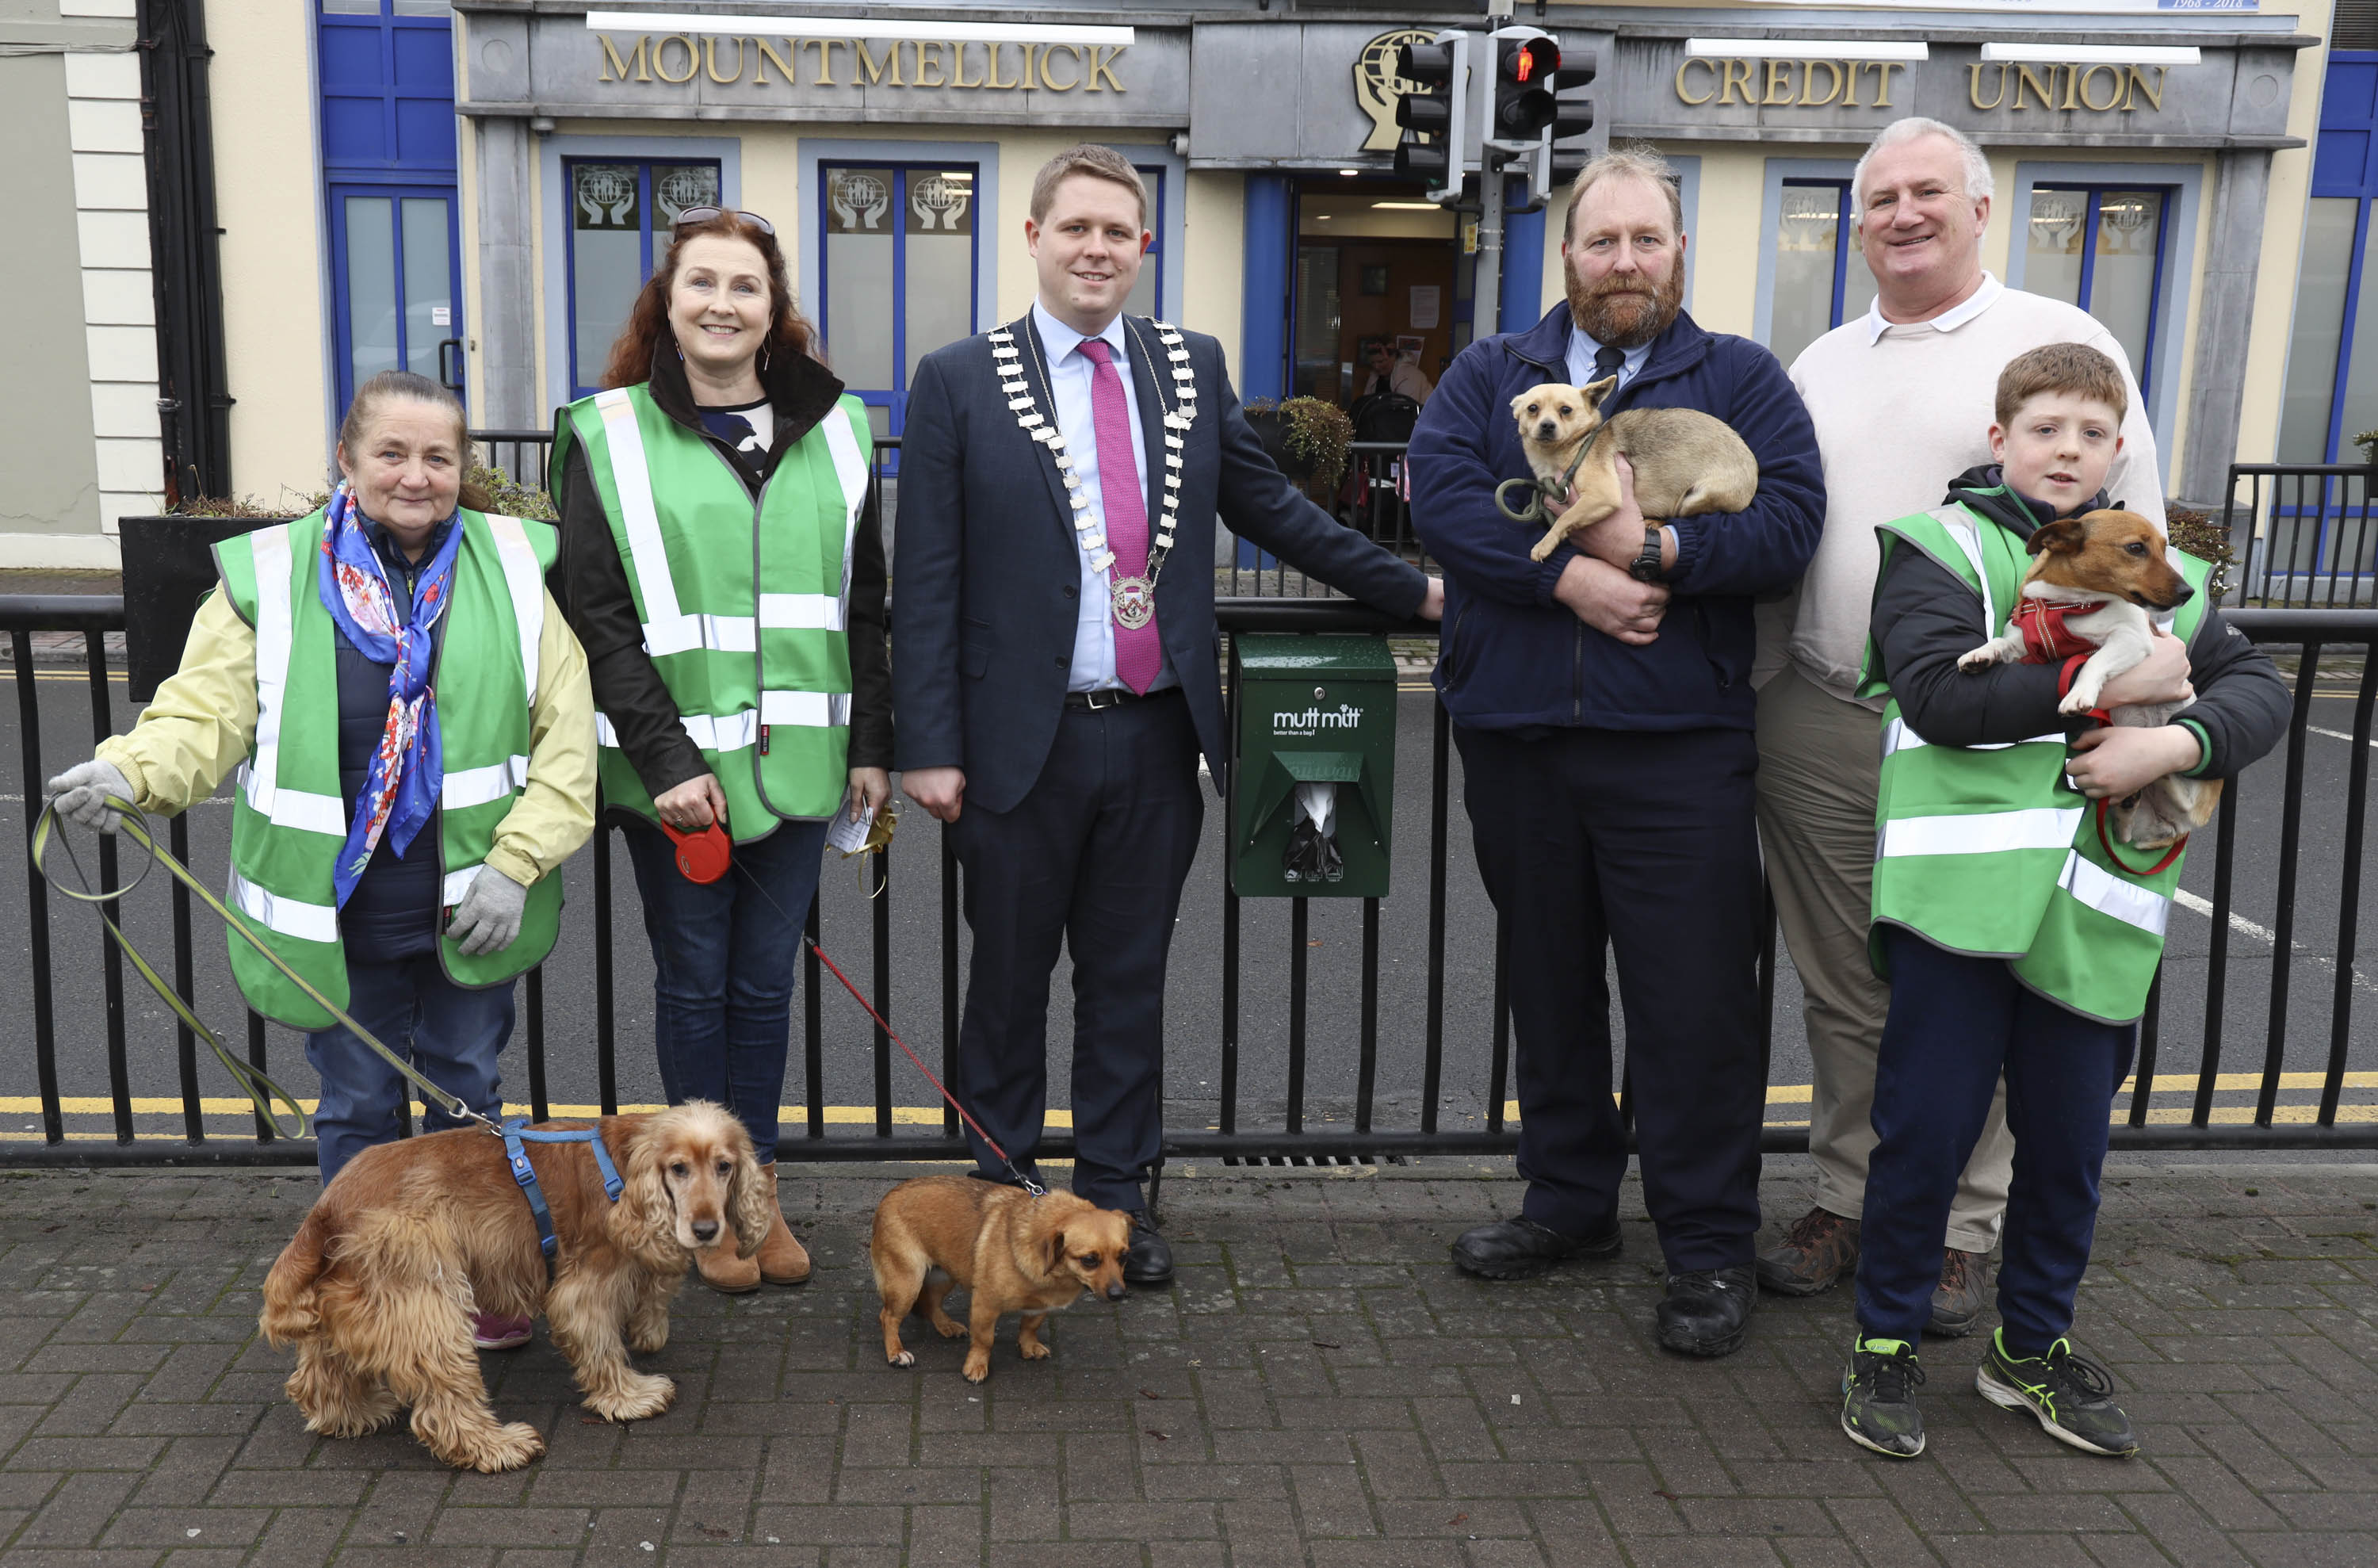 Mountmellick Tidy Towns launch 'Mutt Mitts' in partnership with Laois  County Council - Laois Today